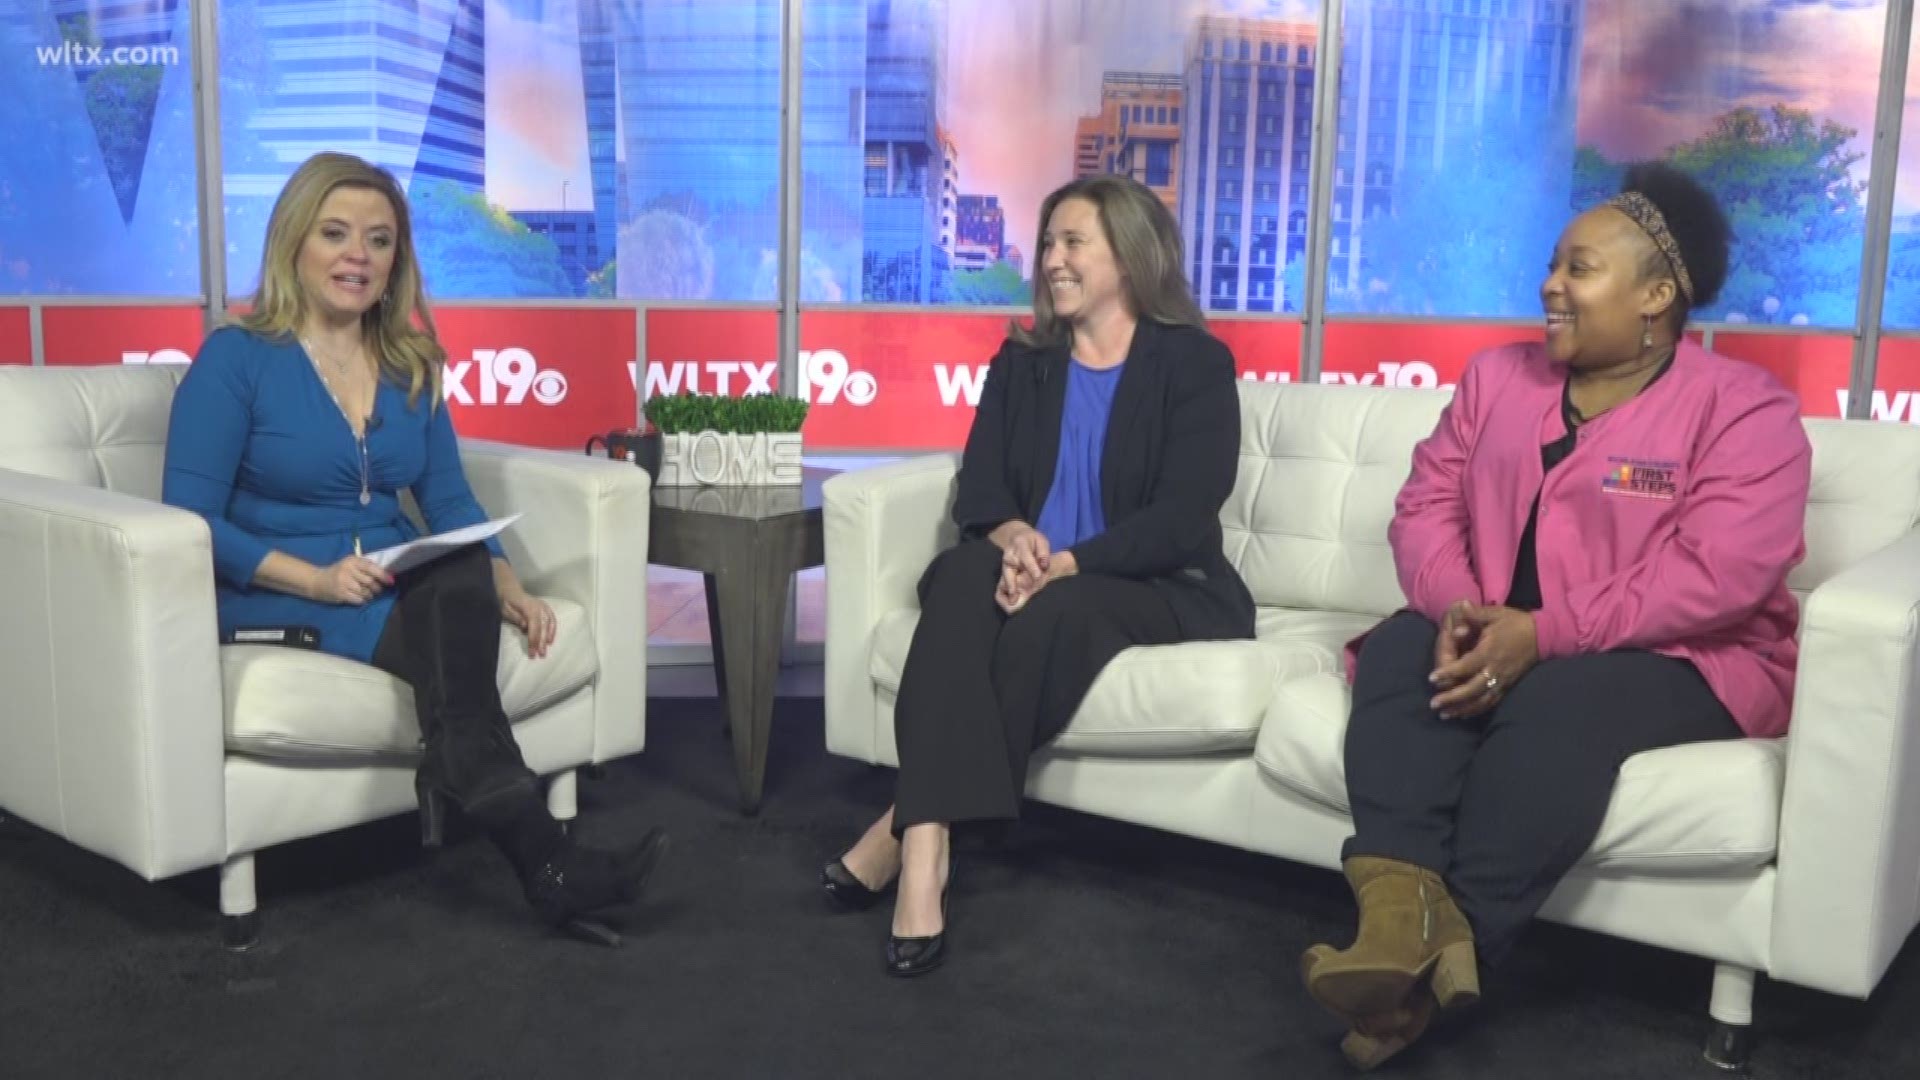 The Richland County First Steps program is beginning a new research study on infant and toddler health, and they are looking to recruit new parents and their children. To explain the new study, First Steps Director Charshina McMillian and LAUNCH Project Coordinator Kerry McIver Cordan joined Andrea Mock in the News19 studio.